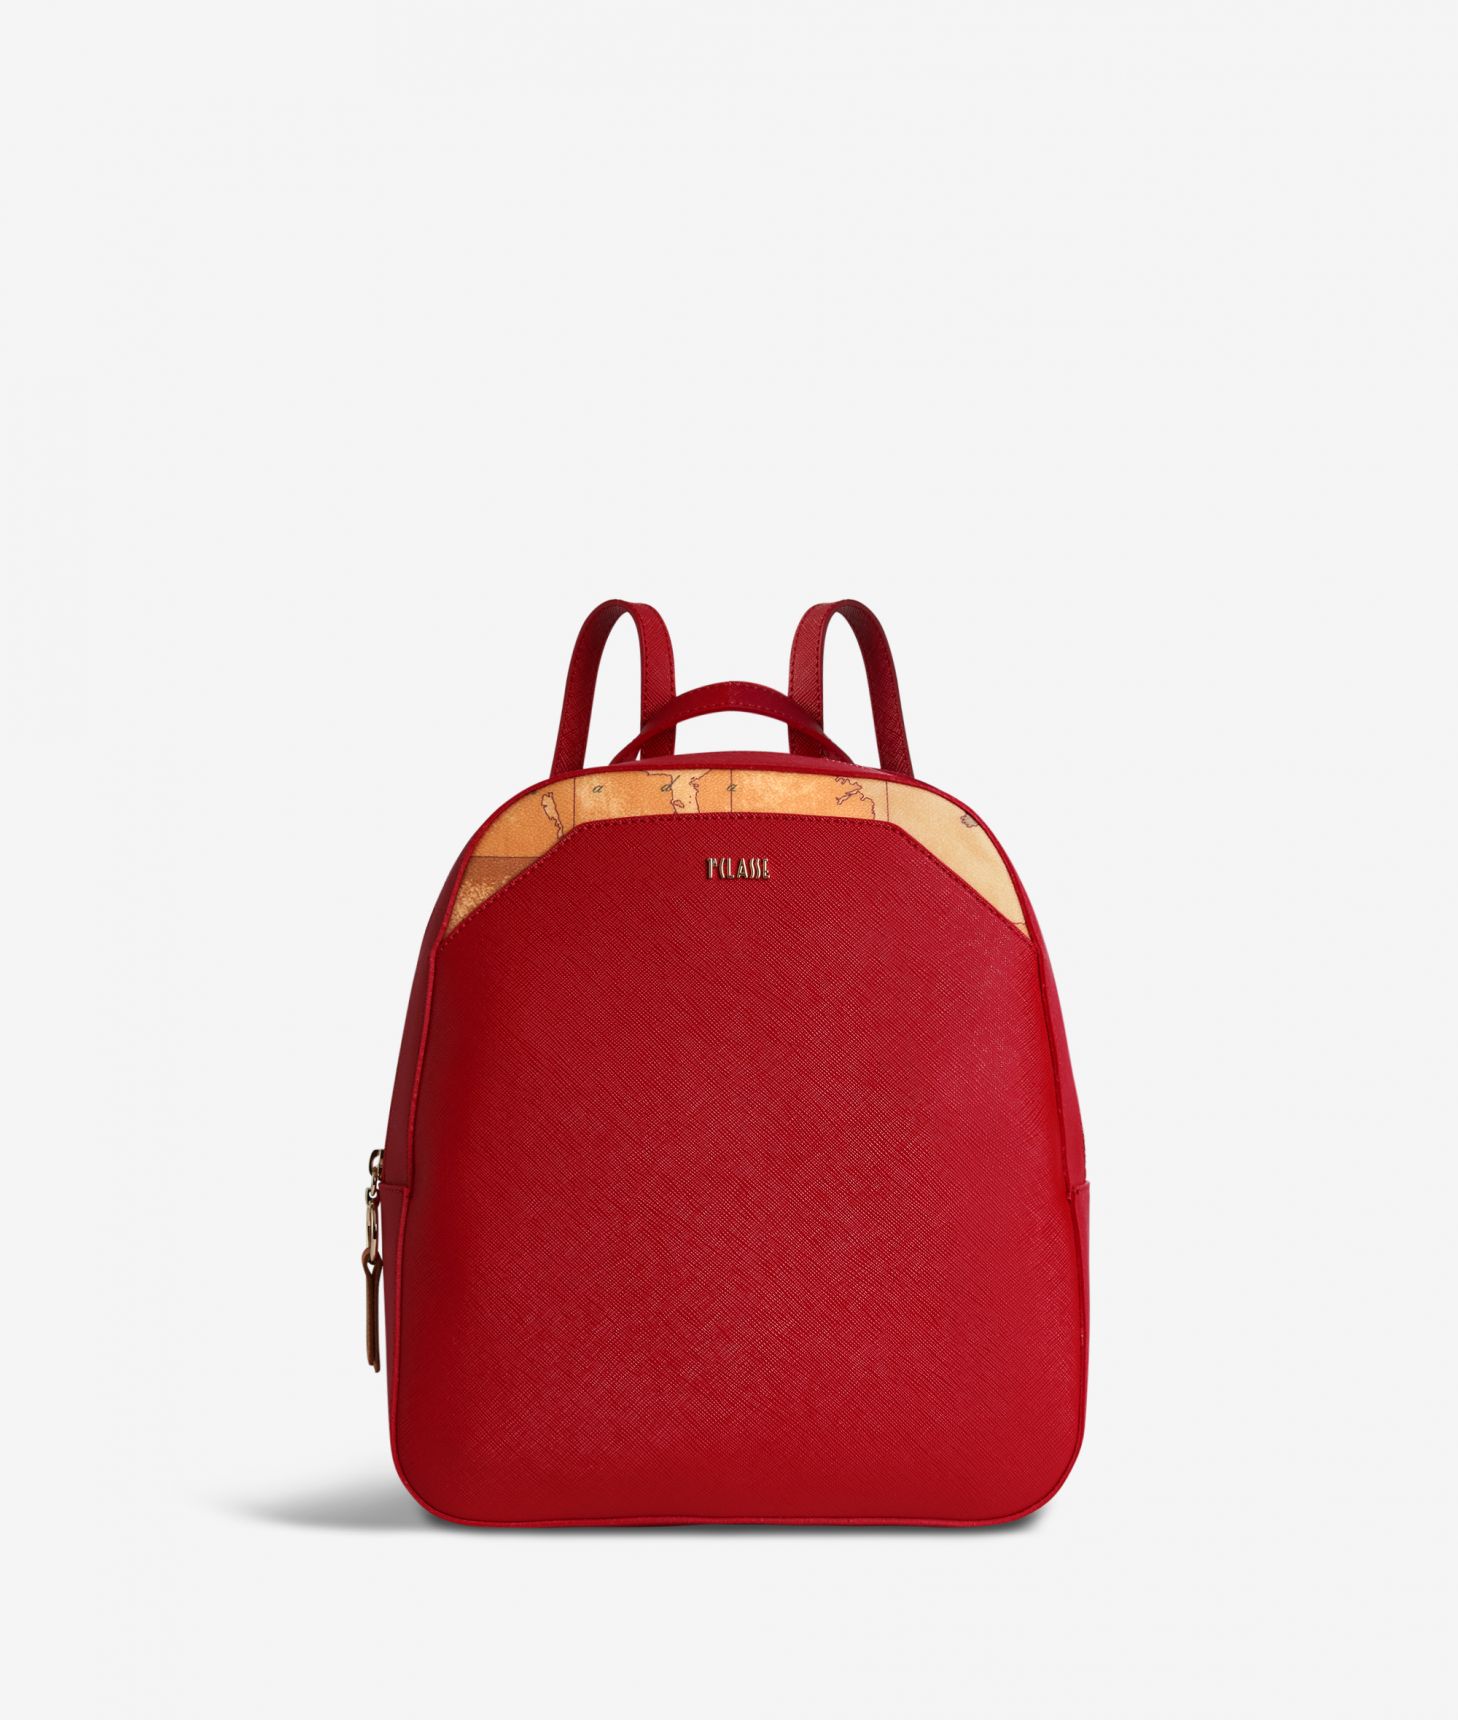 Palace City backpack in saffiano fabric scarlet red,front